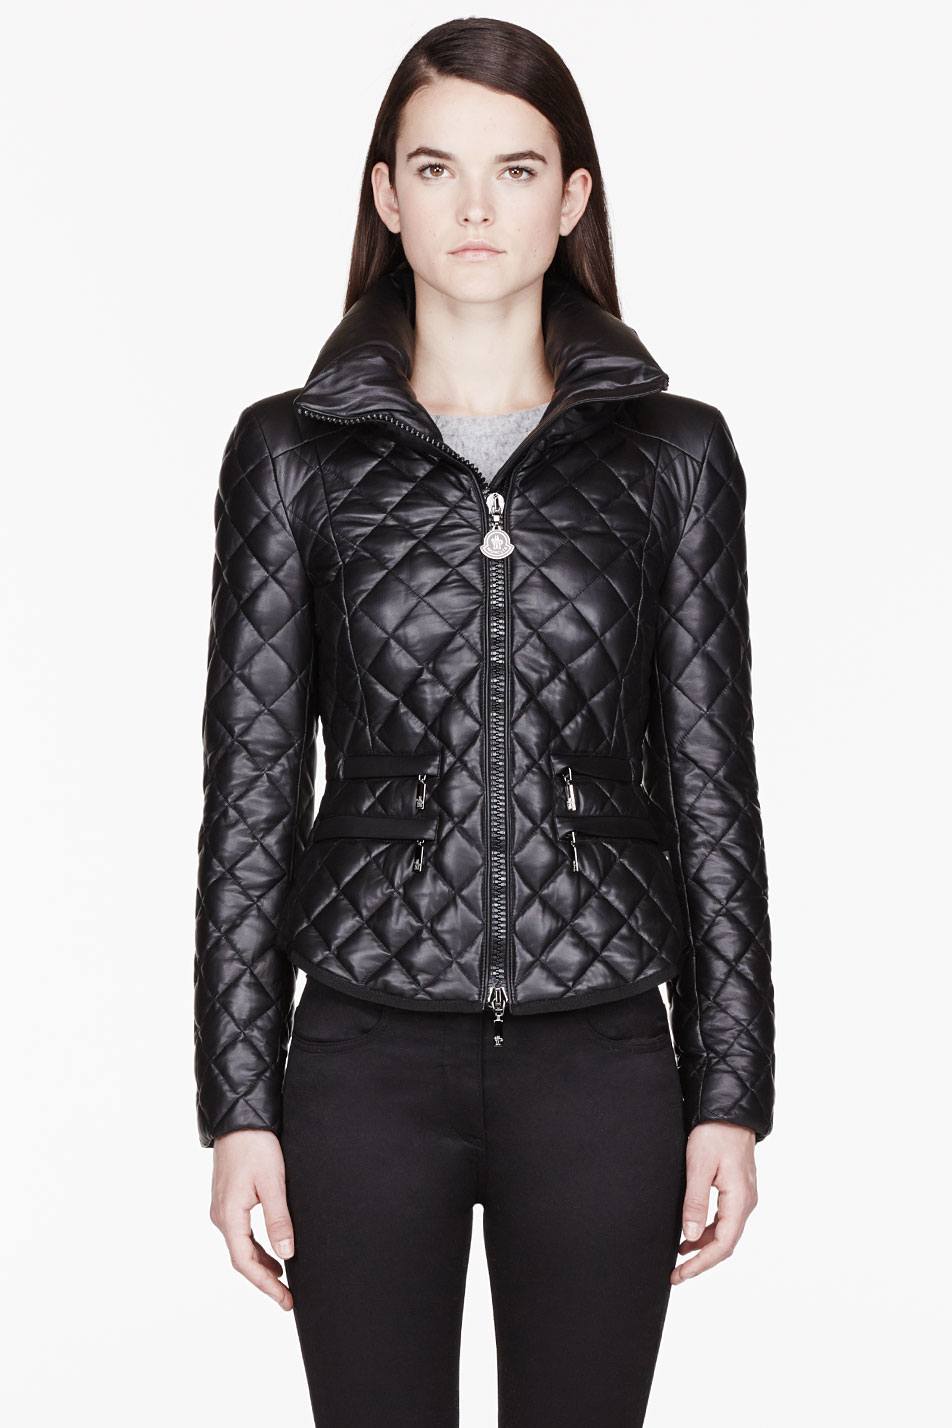 Black Quilted Leather Jacket – Jackets